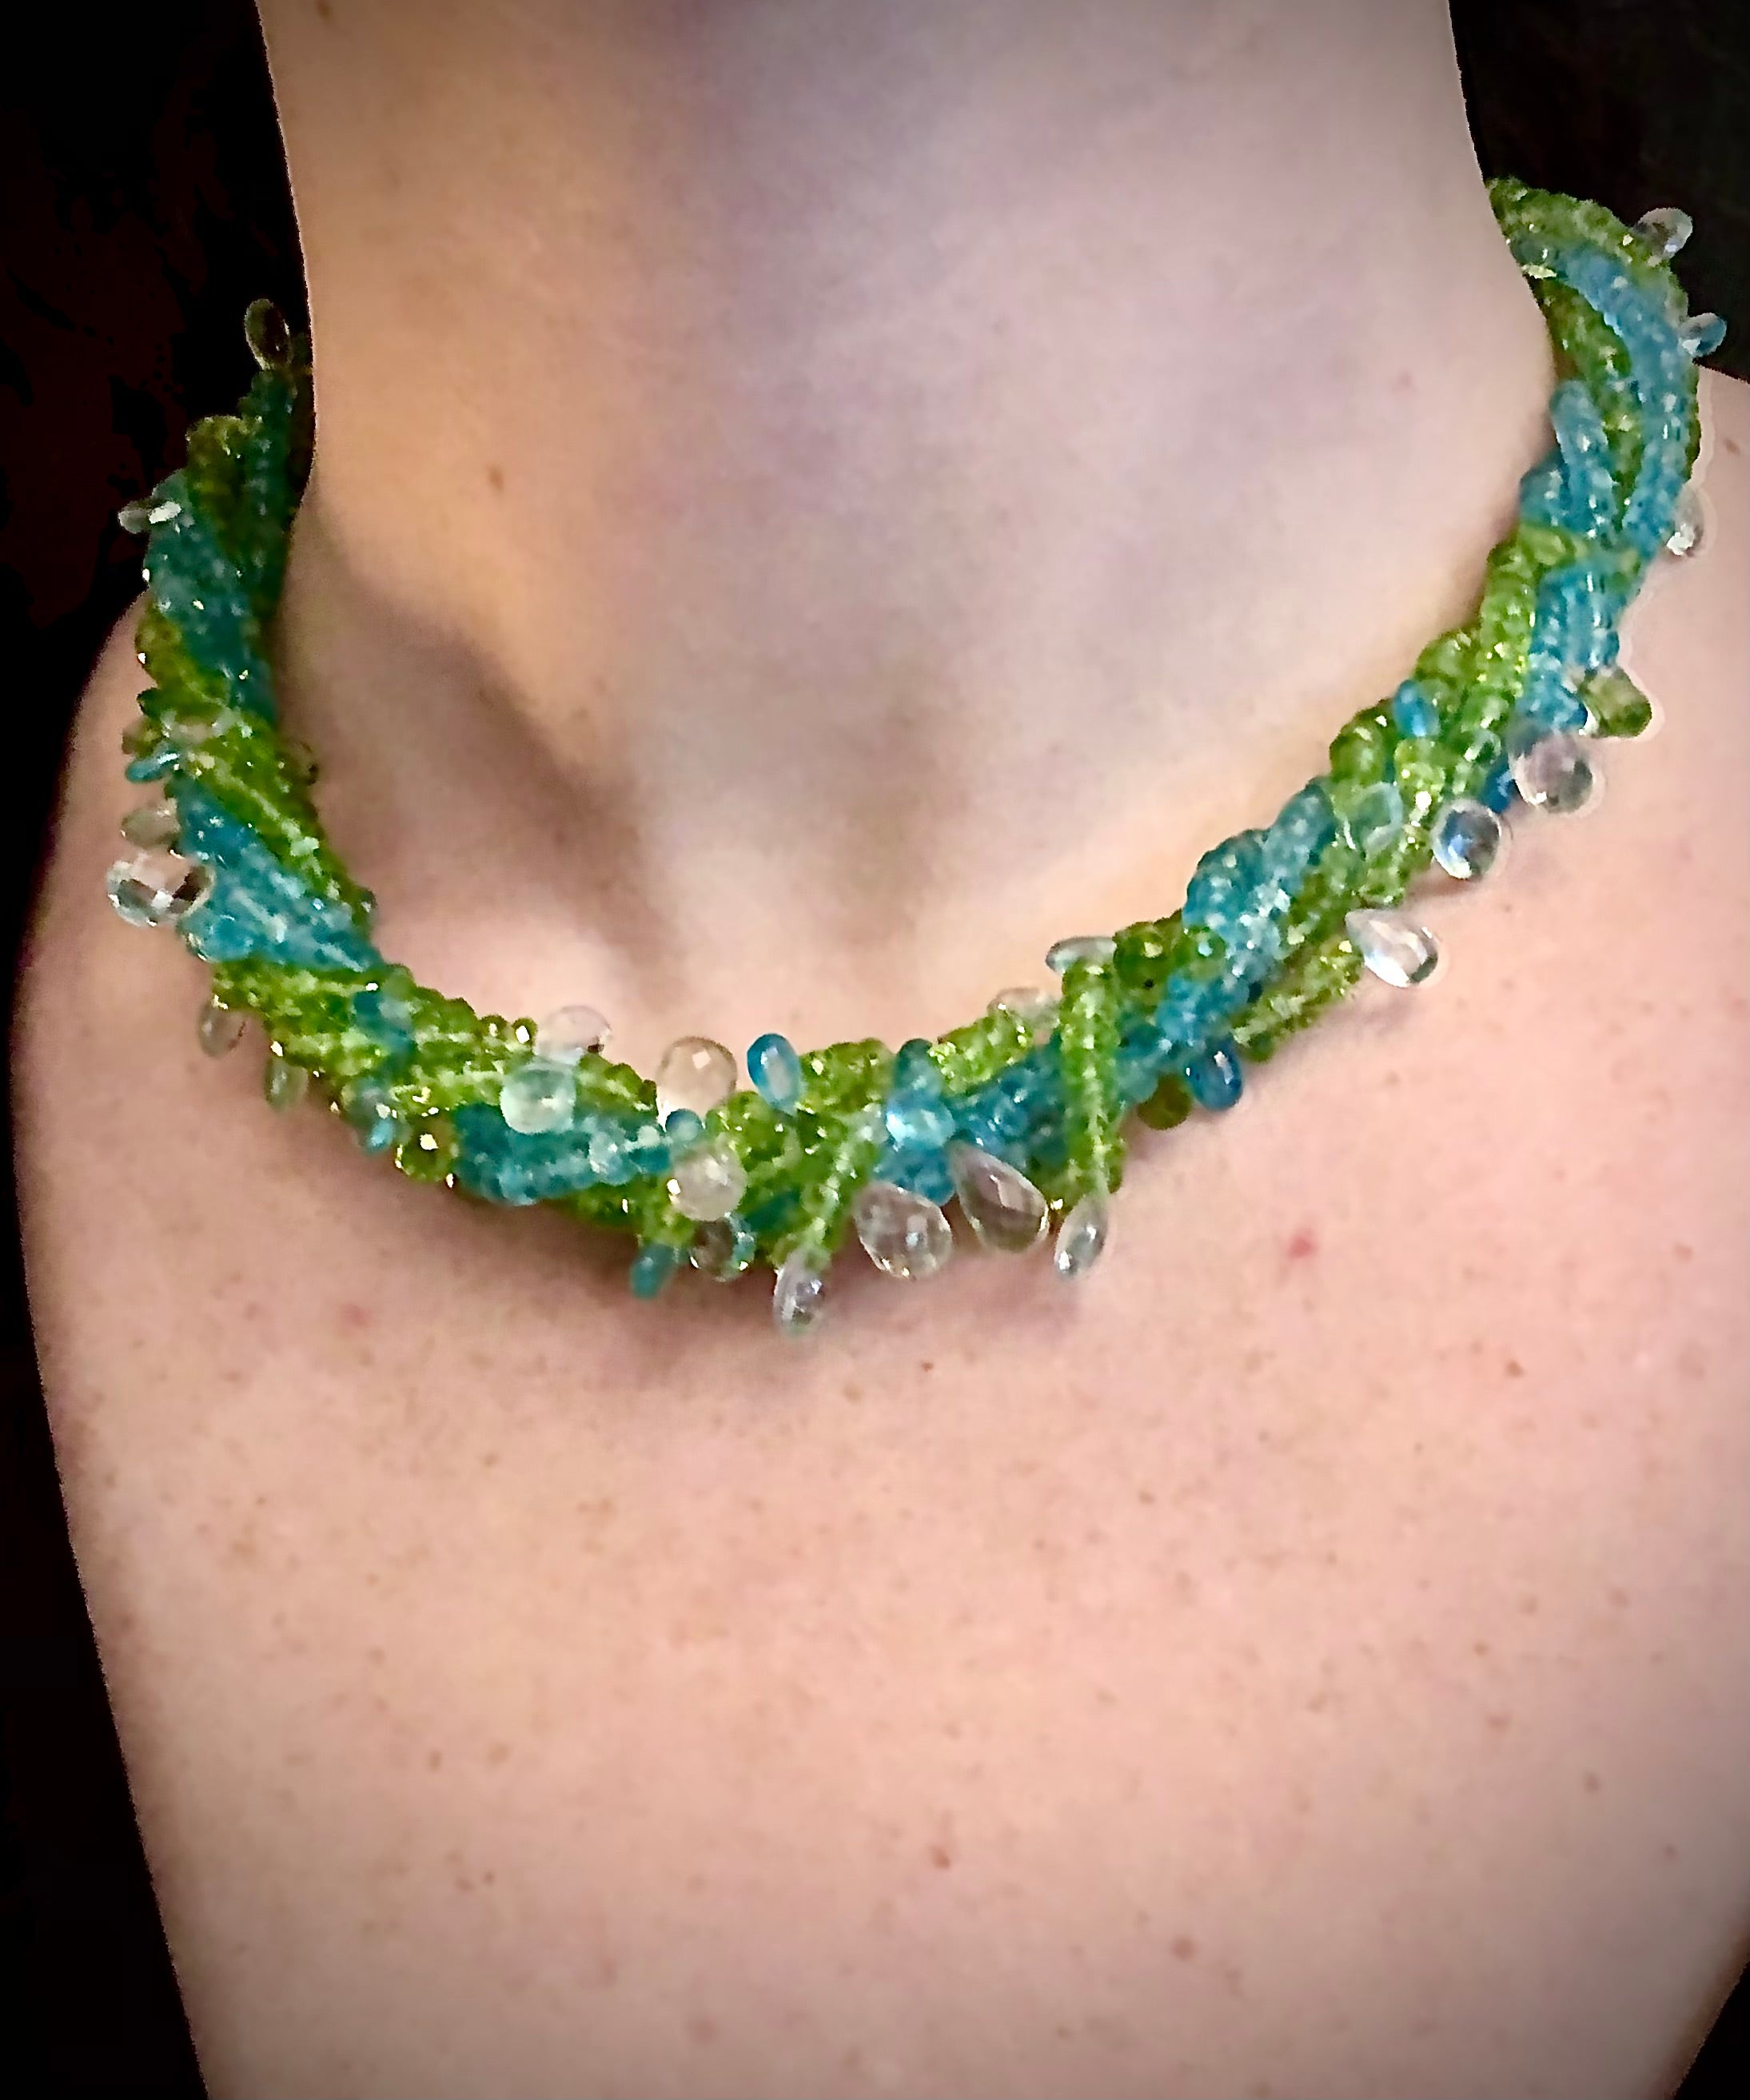 Earth Sky and Raindrops necklace - Green Peridot + Blue Aquamarine For Sale